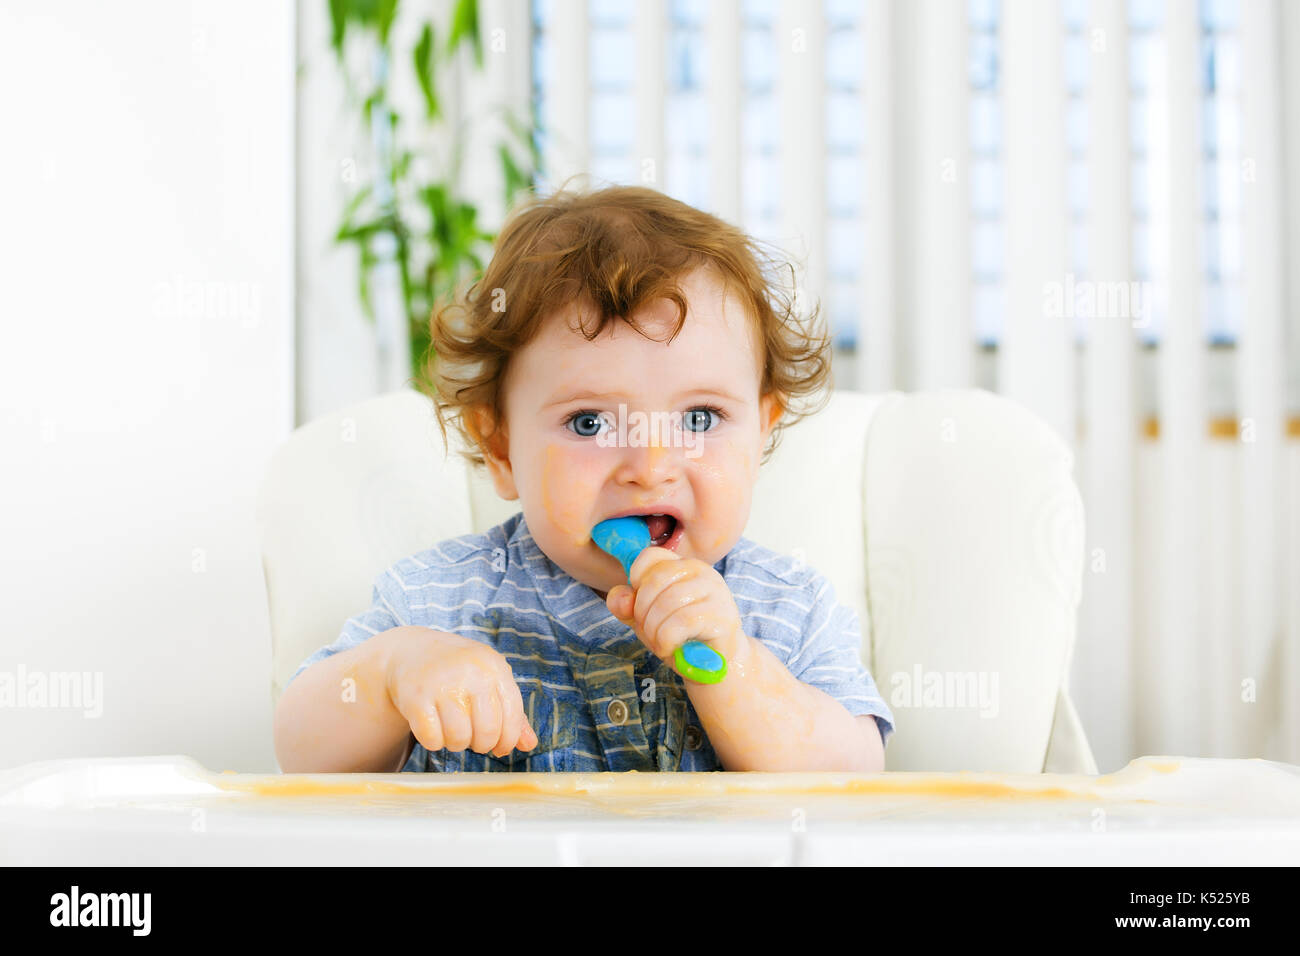 Cute baby boy eating by himself Stock Photo